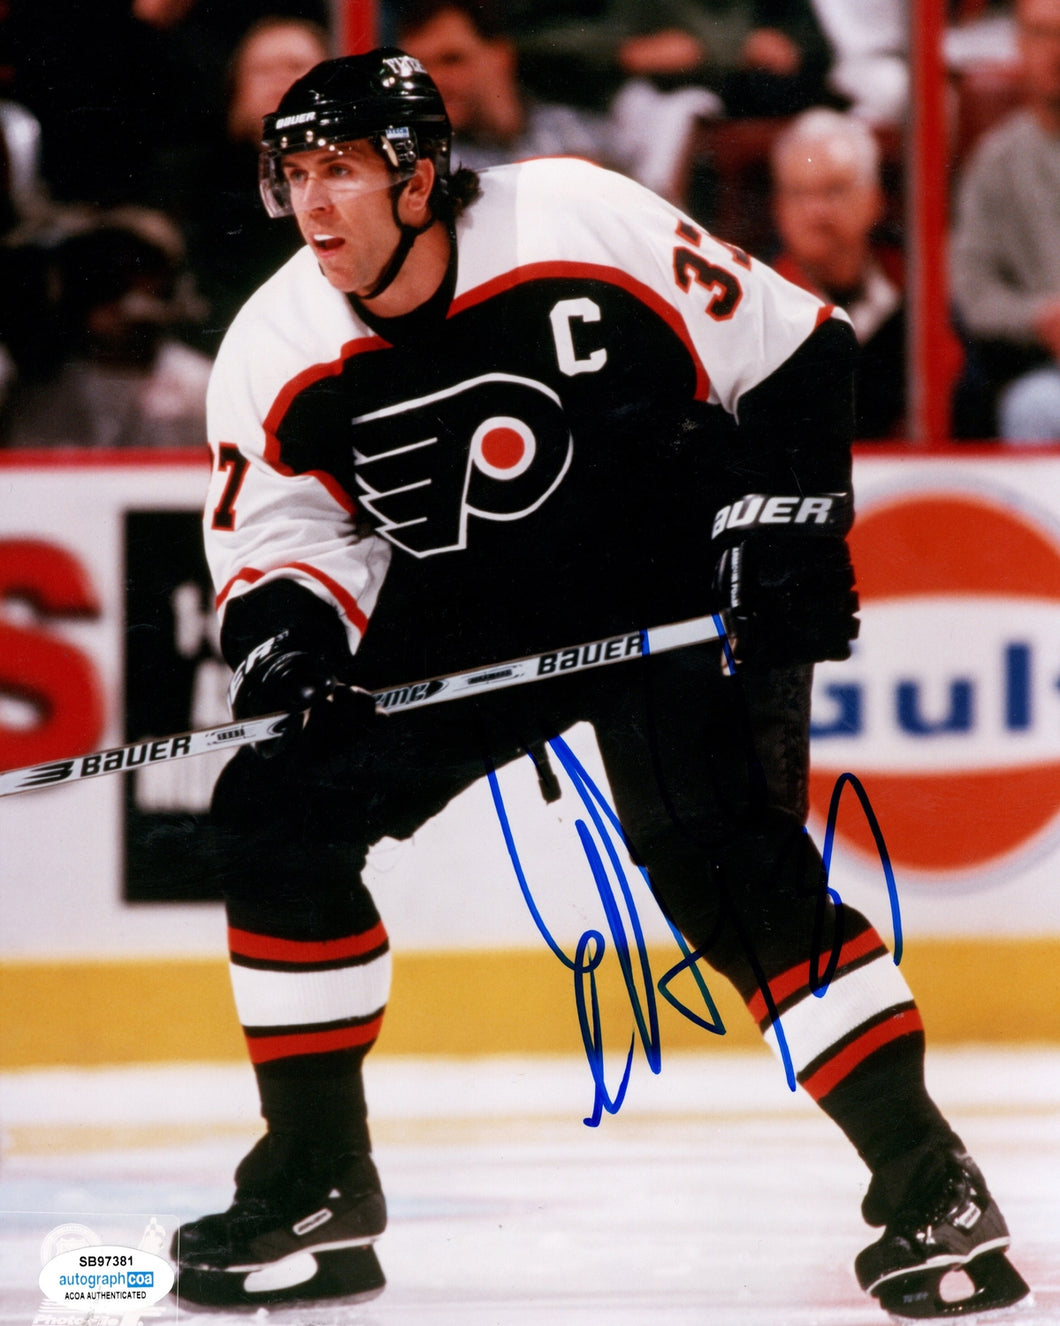 Eric Desjardins Autographed Signed 8x10 NHL Hockey Photo Flyers Canadiens